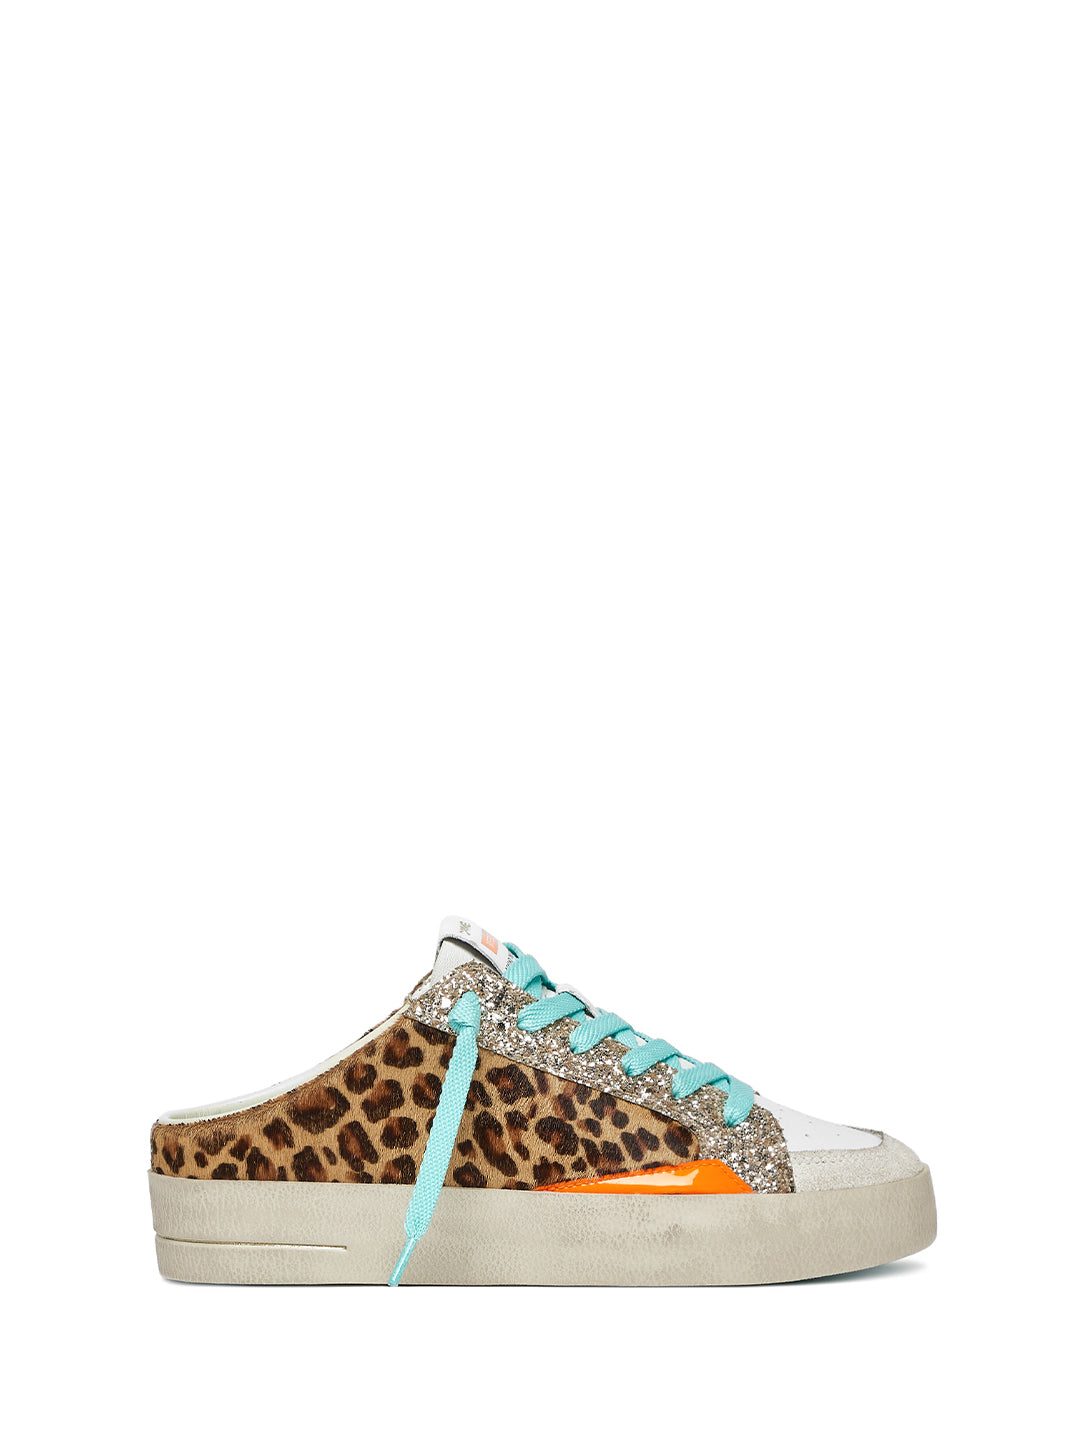 Crime Sk8 Deluxe Sabot Jungle Fever sneakers maculato